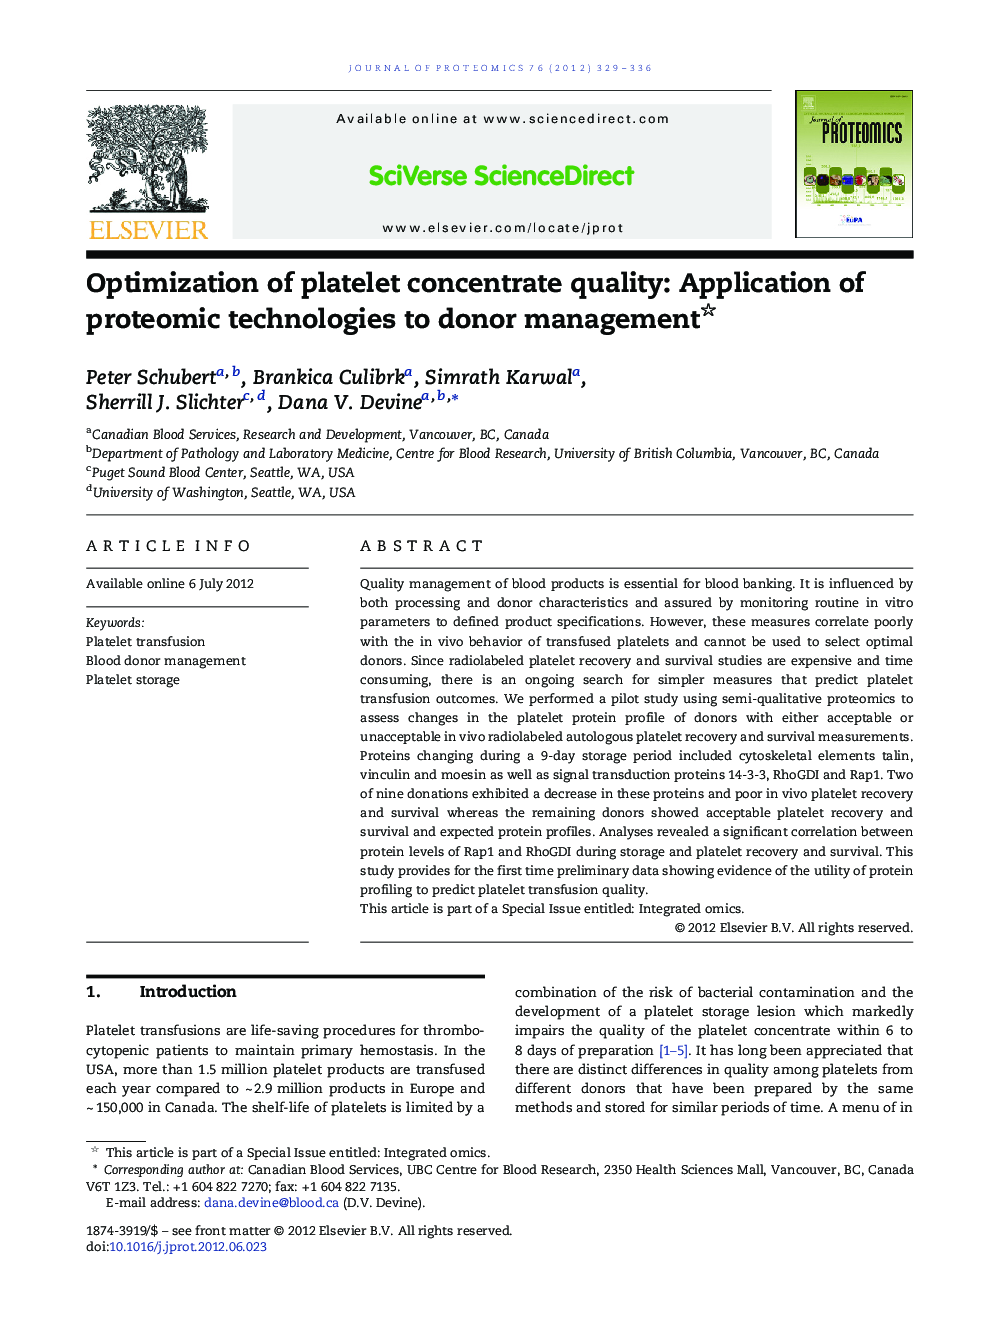 Optimization of platelet concentrate quality: Application of proteomic technologies to donor management